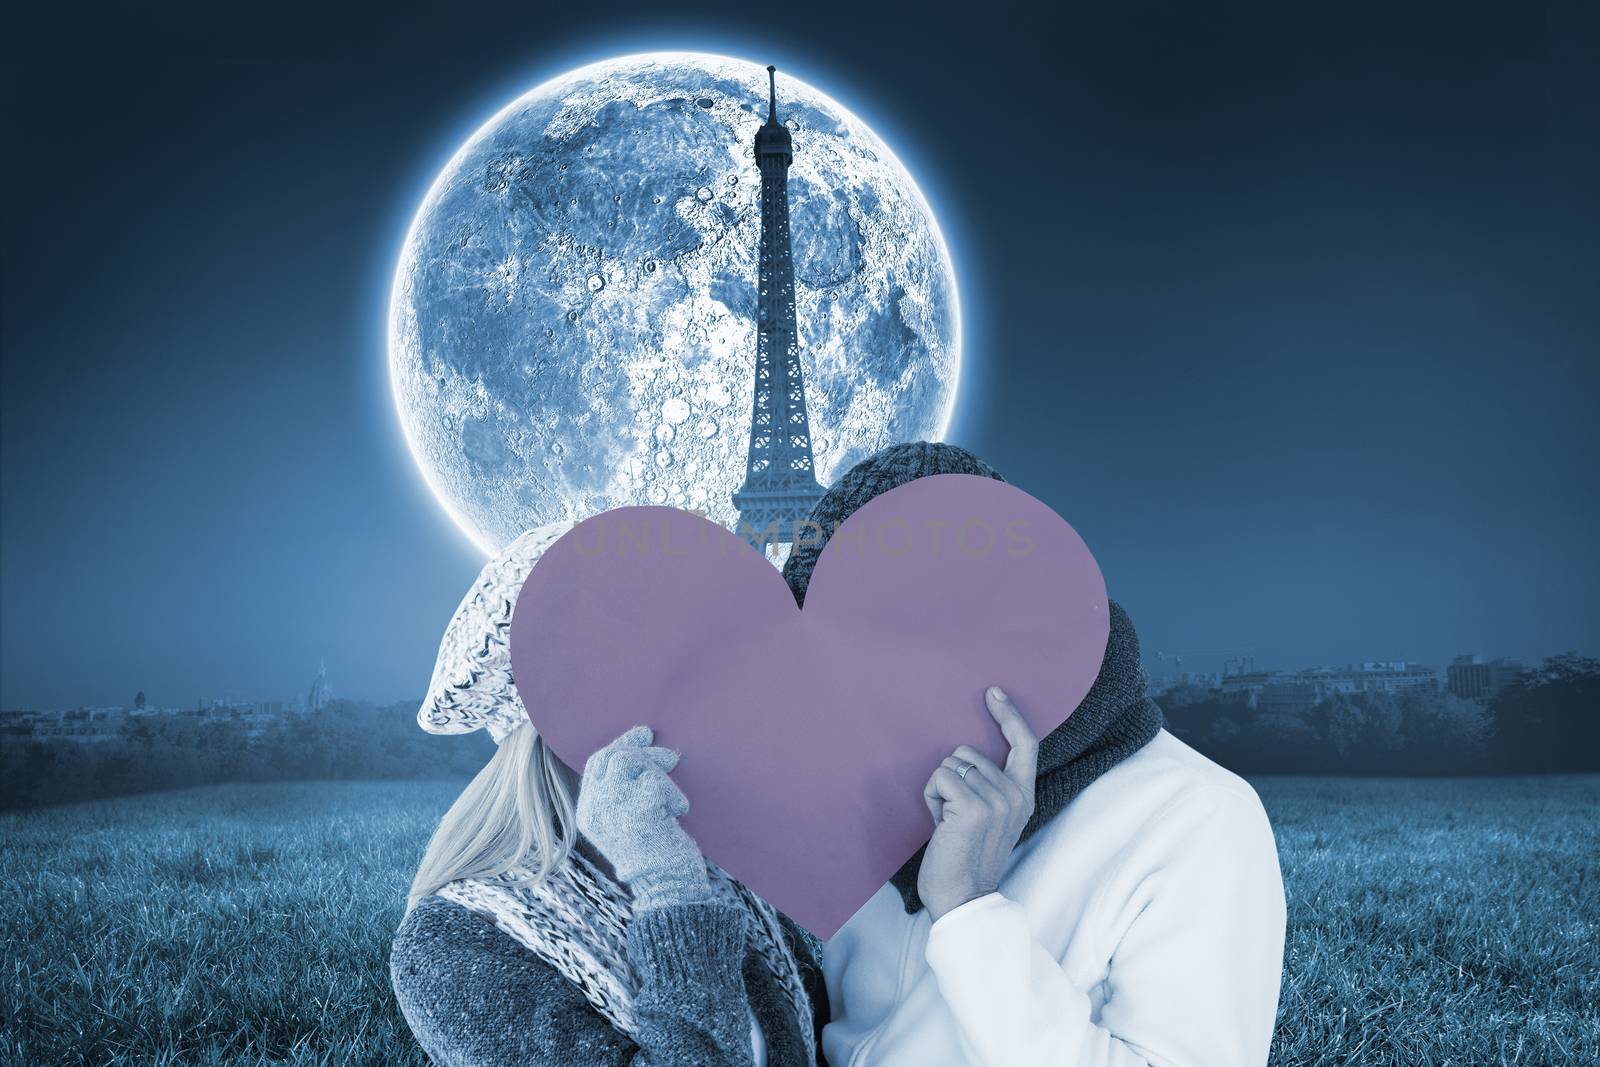 Couple in winter fashion posing with heart shape against large moon over paris